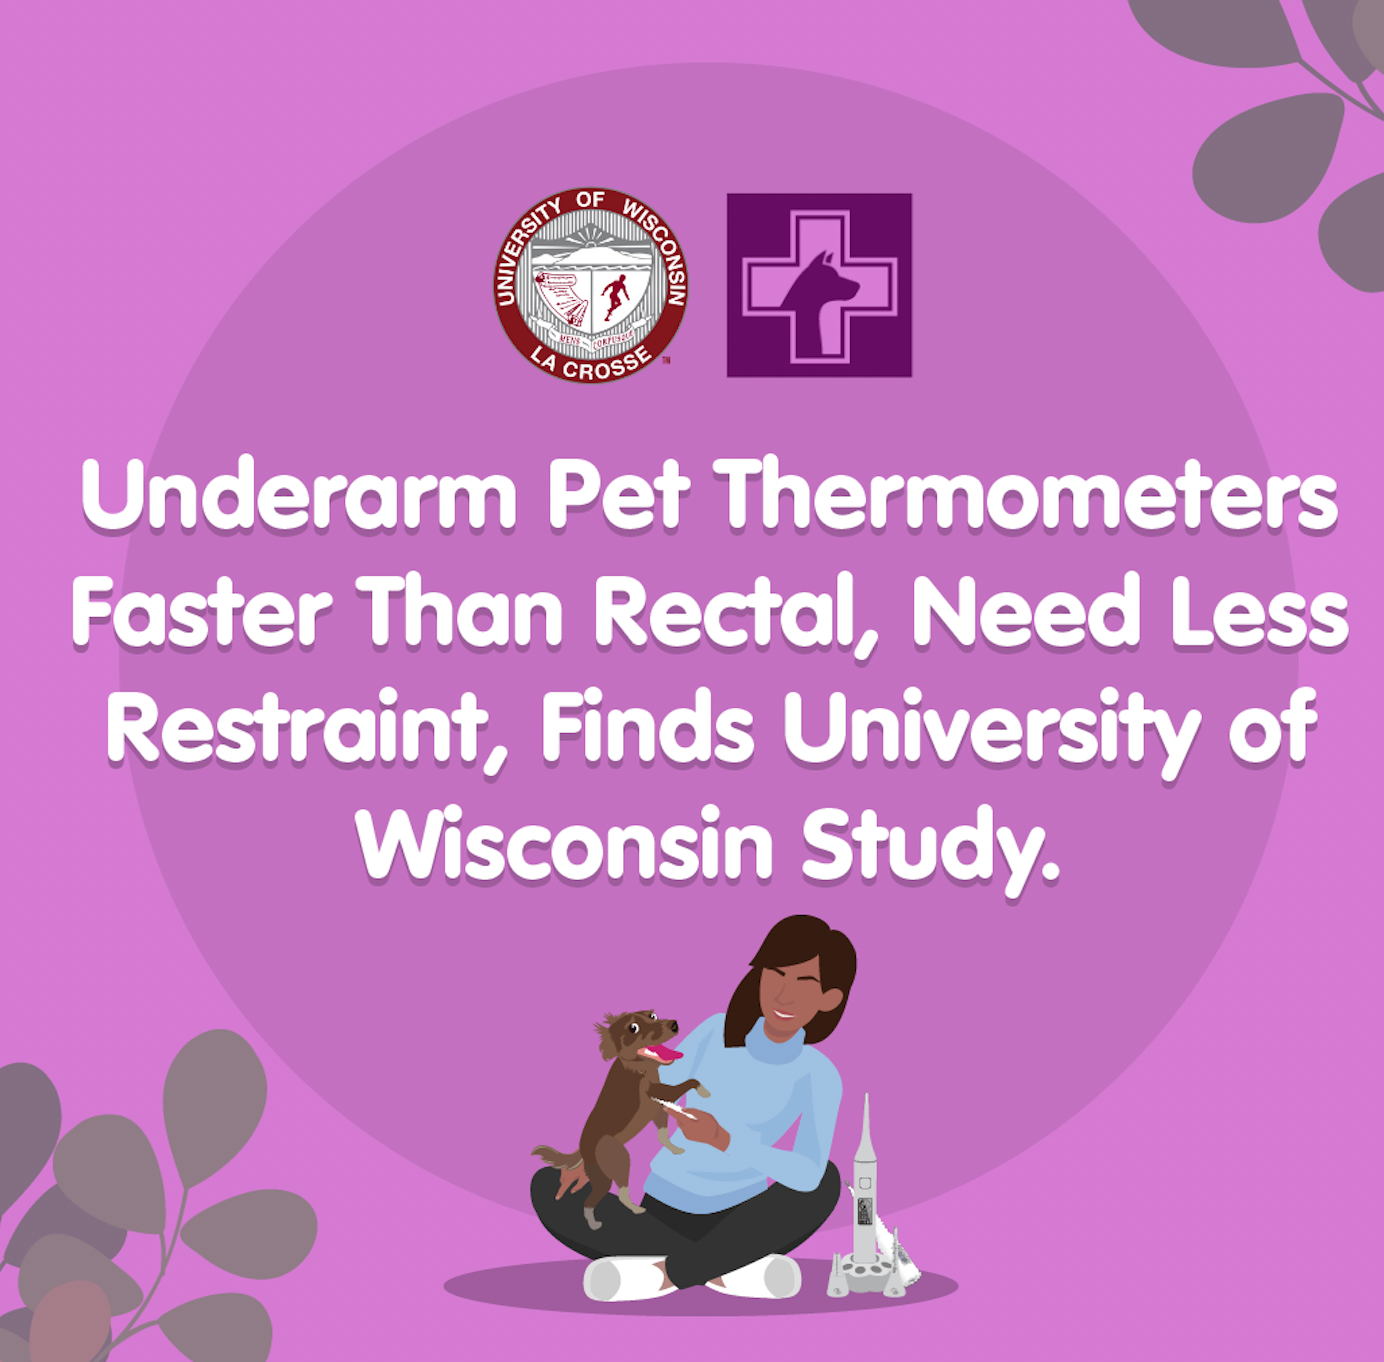 Study reveals underarm pet thermometers are faster, reduce necessary restraint